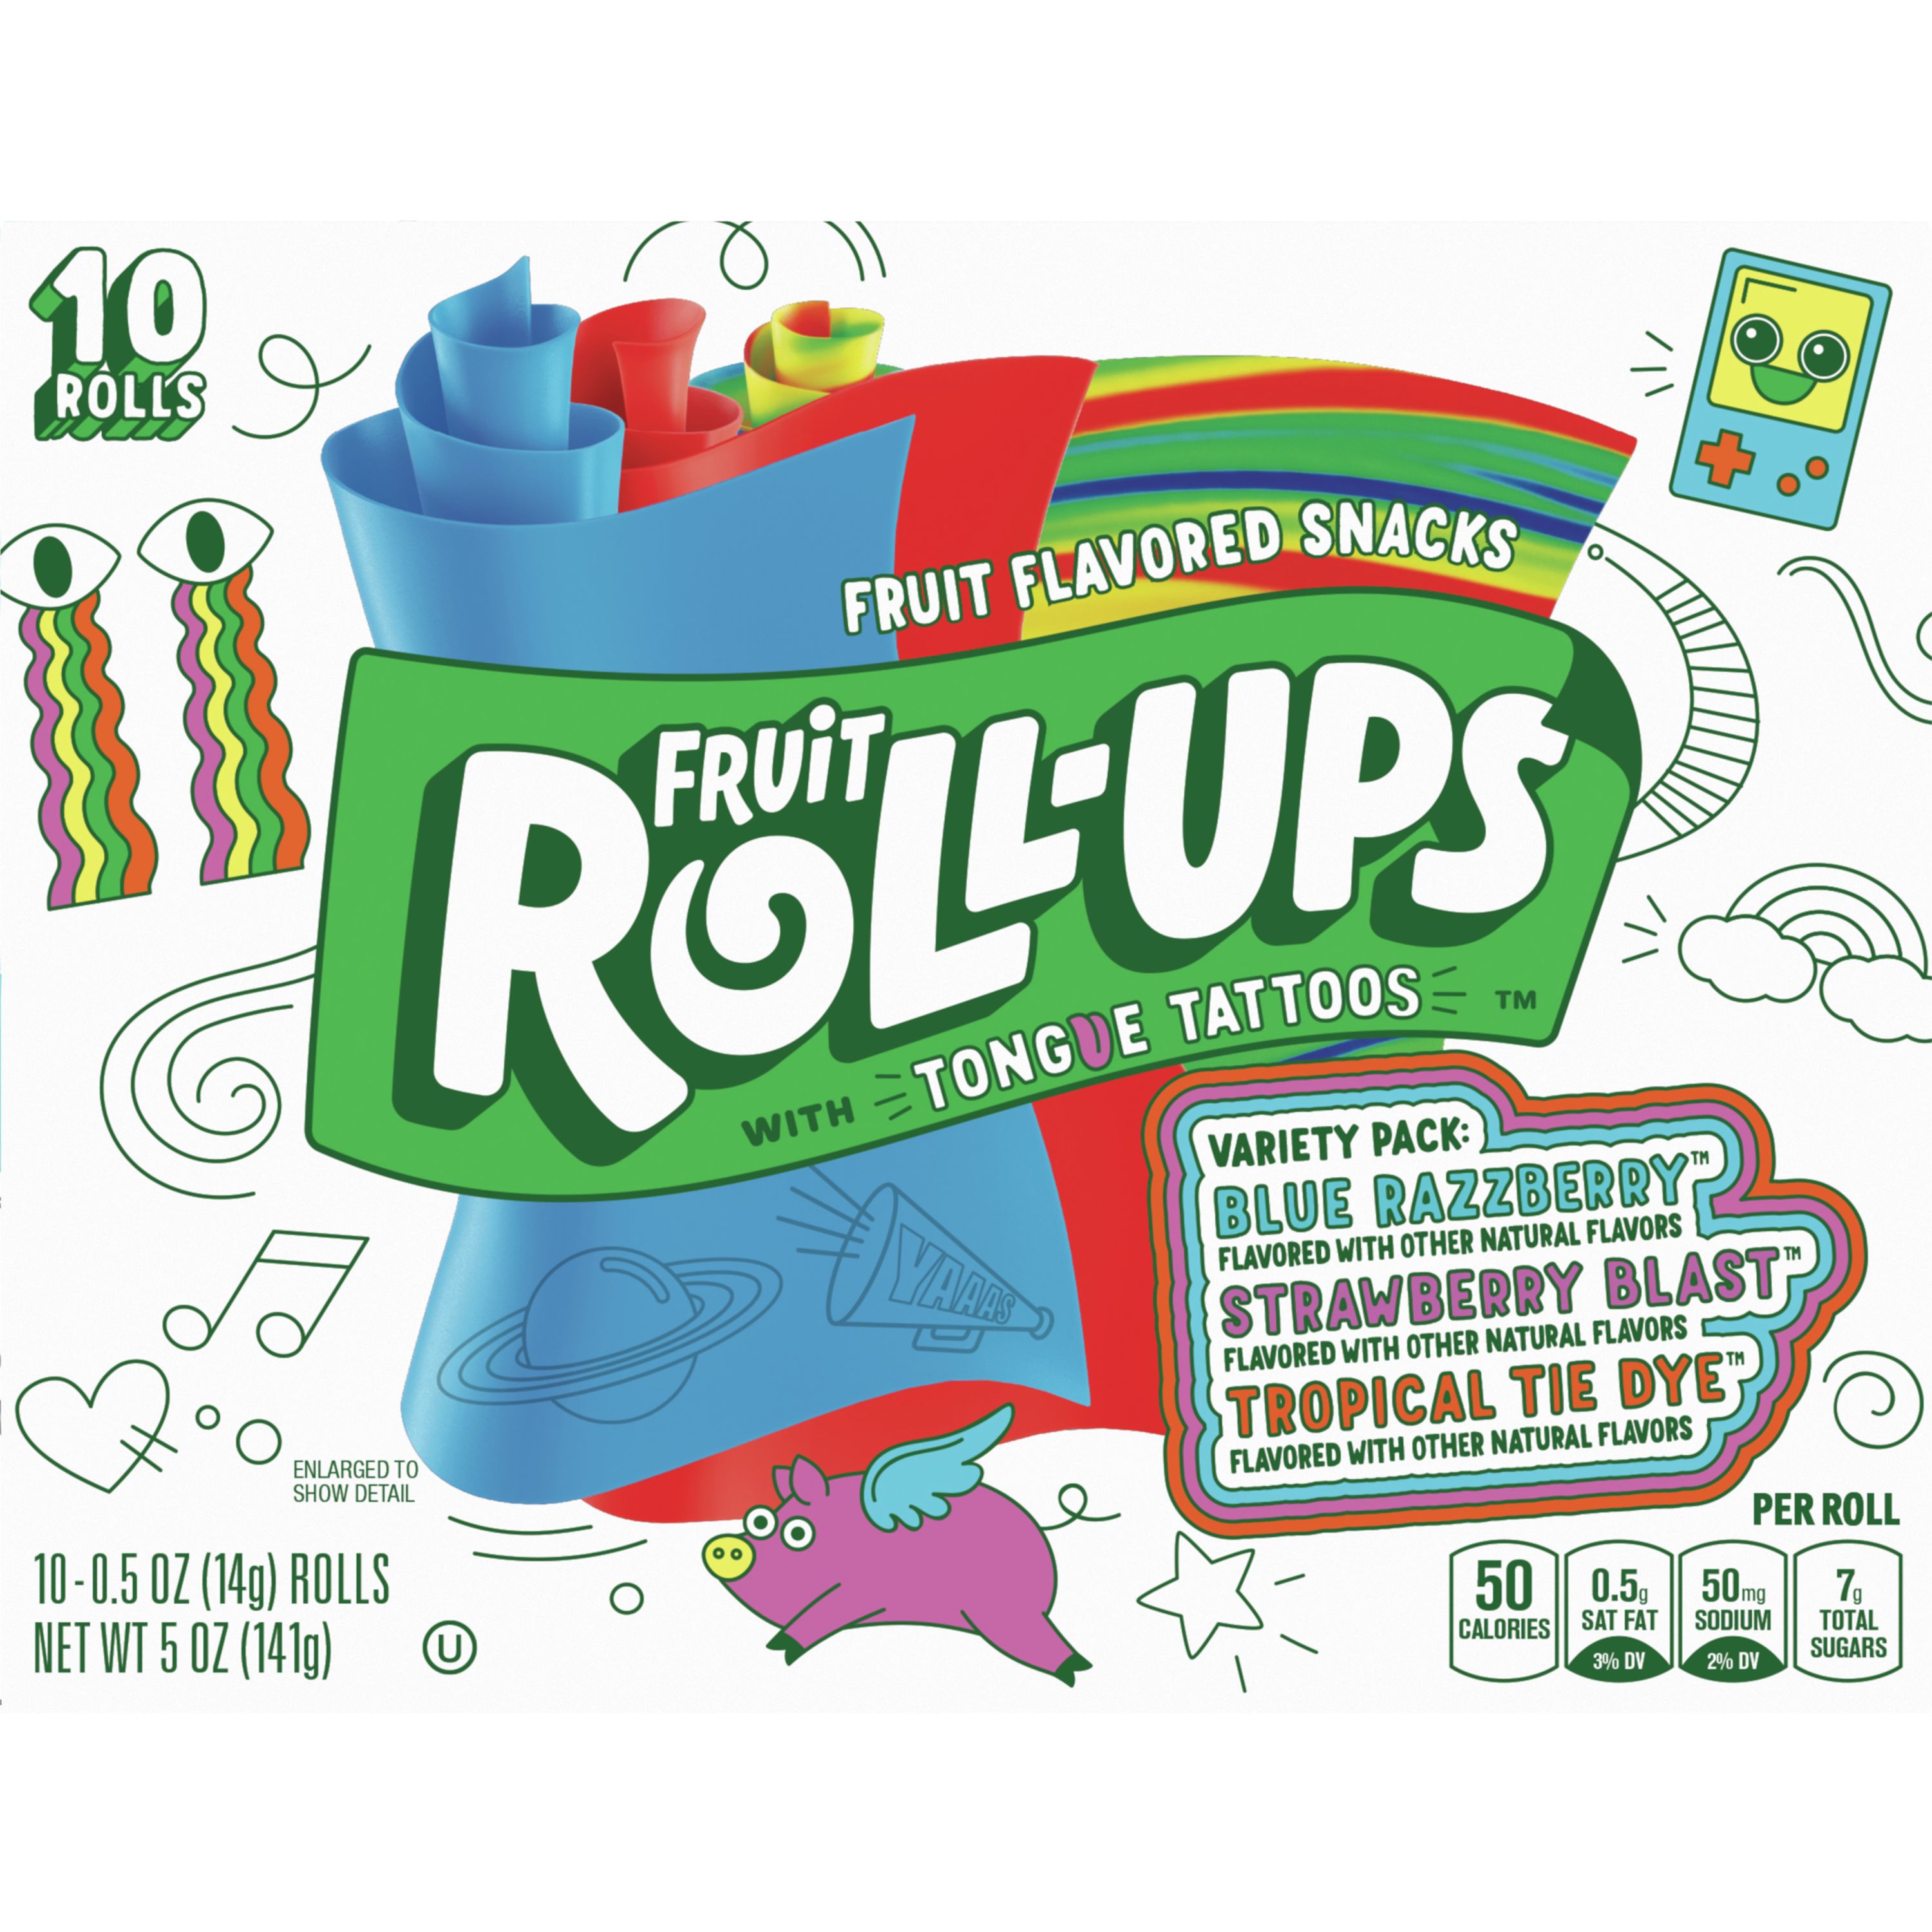 80s Food  Fruit roll ups Fruit snacks Snack coupons